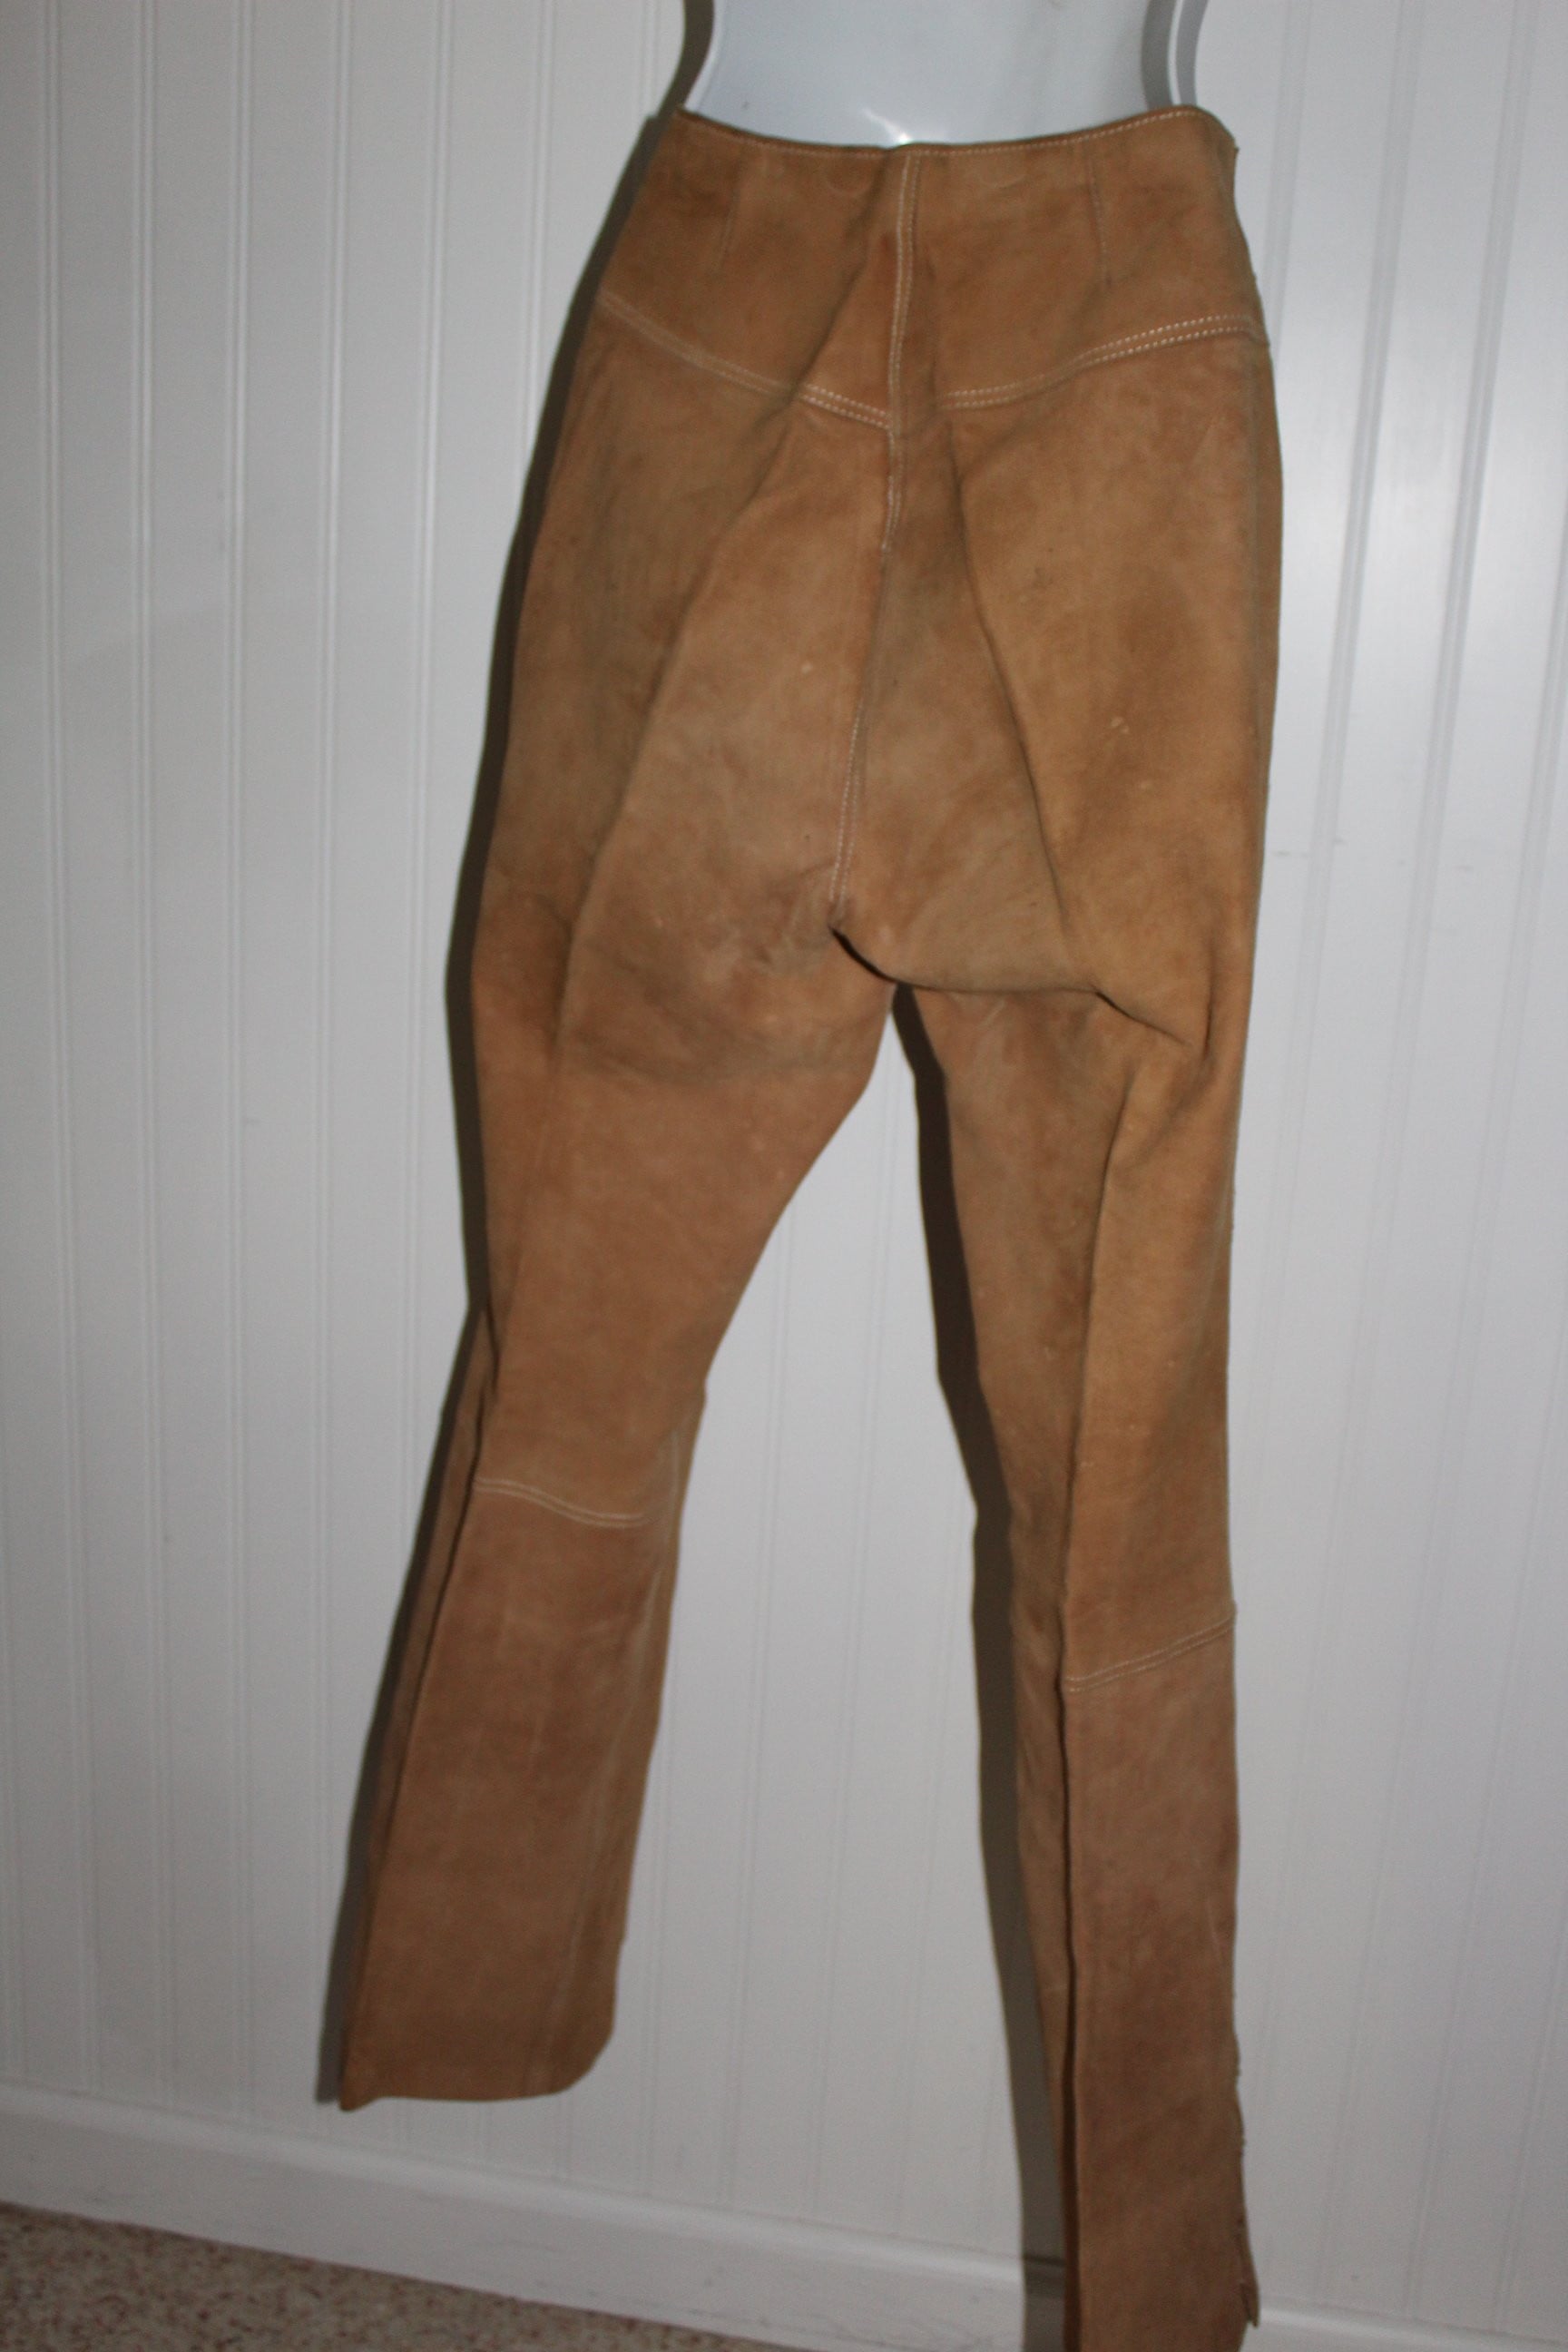 Vintage Leather Pants Laced Flare Leg Caramel Cream Top Stitch Great Detail bell bottom